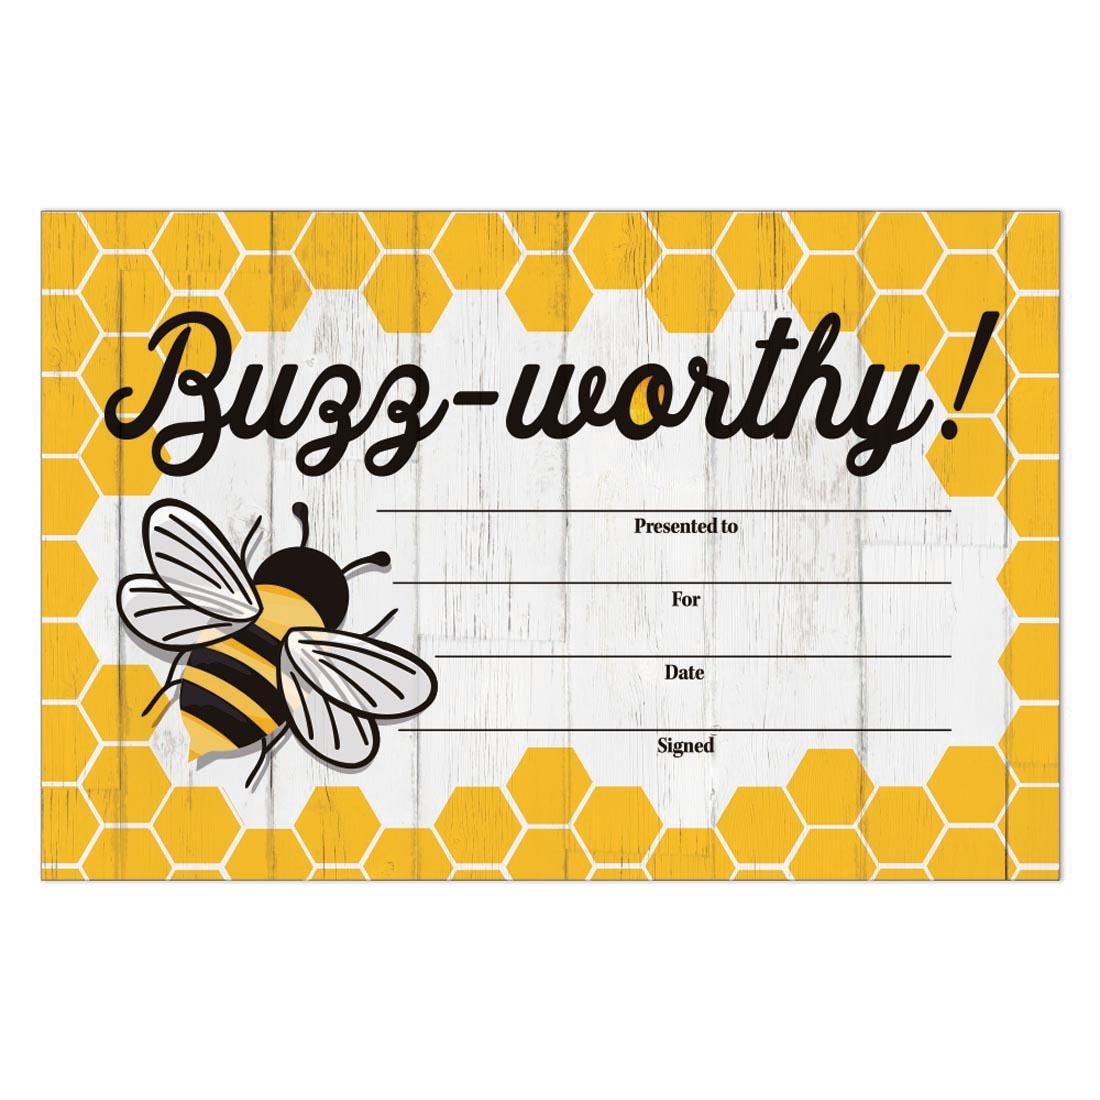 Buzz-worthy! Recognition Award from The Hive collection by Eureka